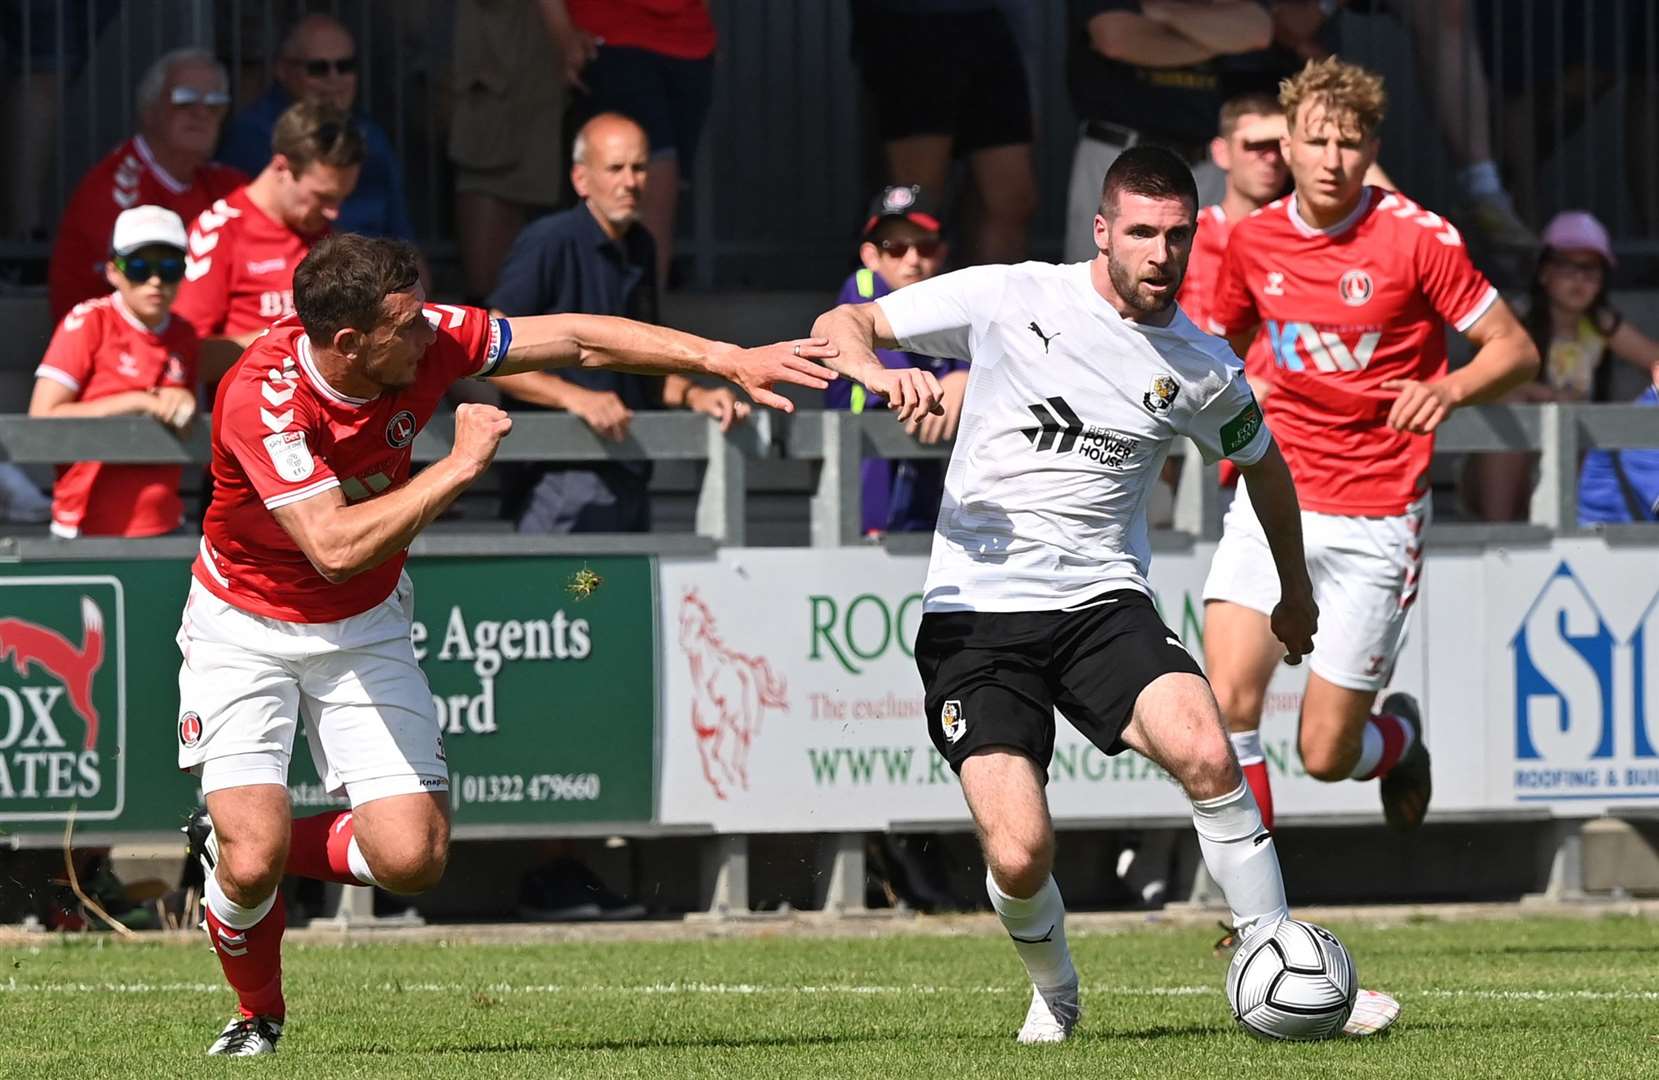 Danny Leonard - in action during pre-season against Charlton, impressed for Dartford at St Albans. Picture: Keith Gillard (50268478)